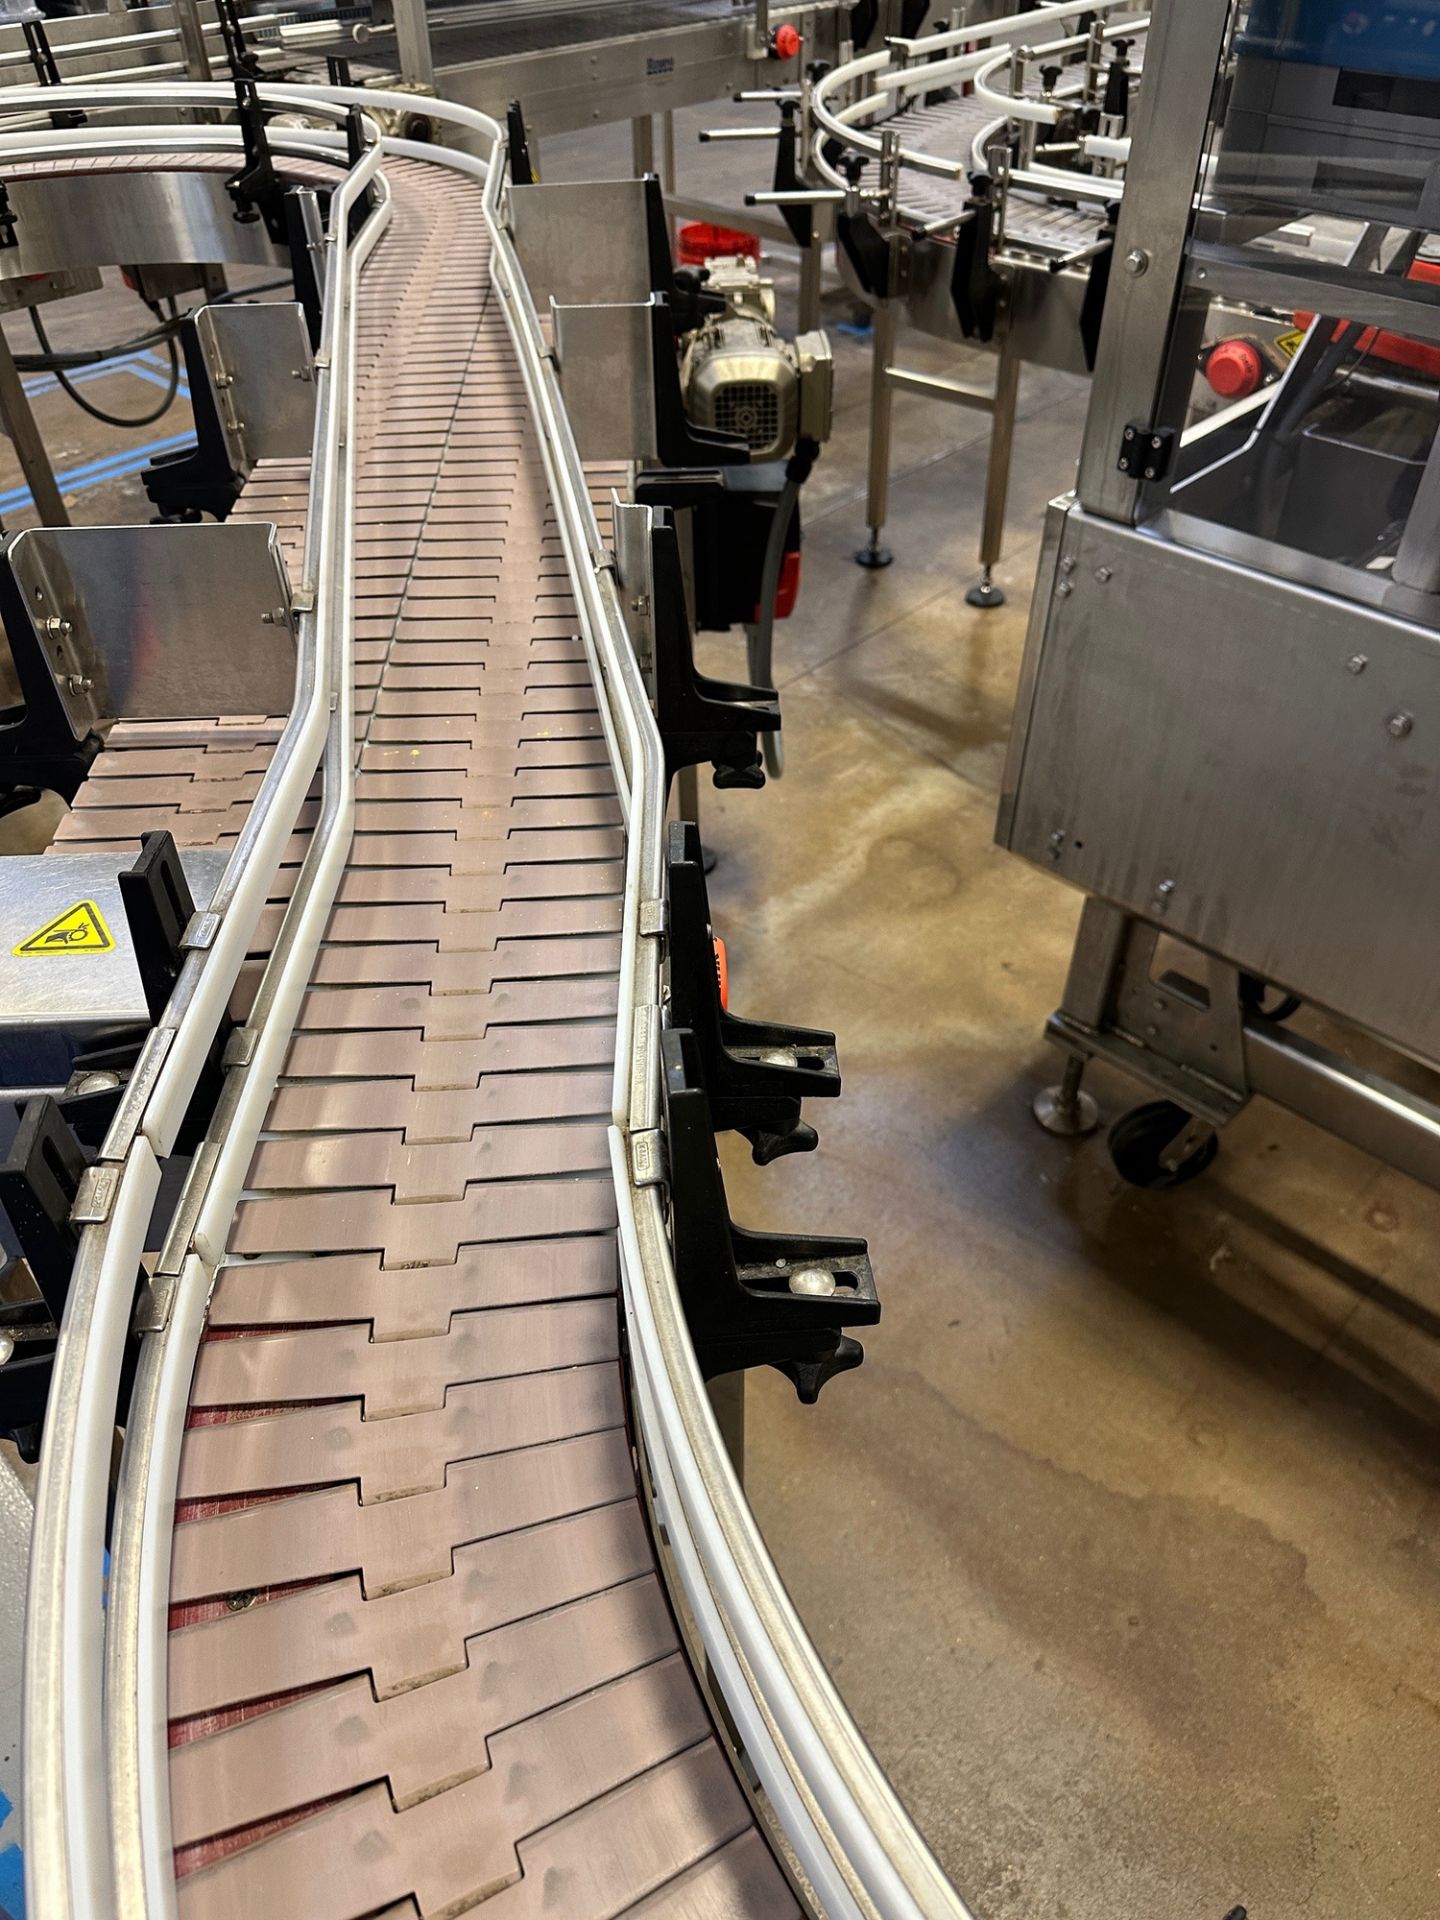 Bevco Conveyor over Stainless Steel Frame - (3) 45 Degree Bends with SEW VFD (Appro | Rig Fee $750 - Image 2 of 4